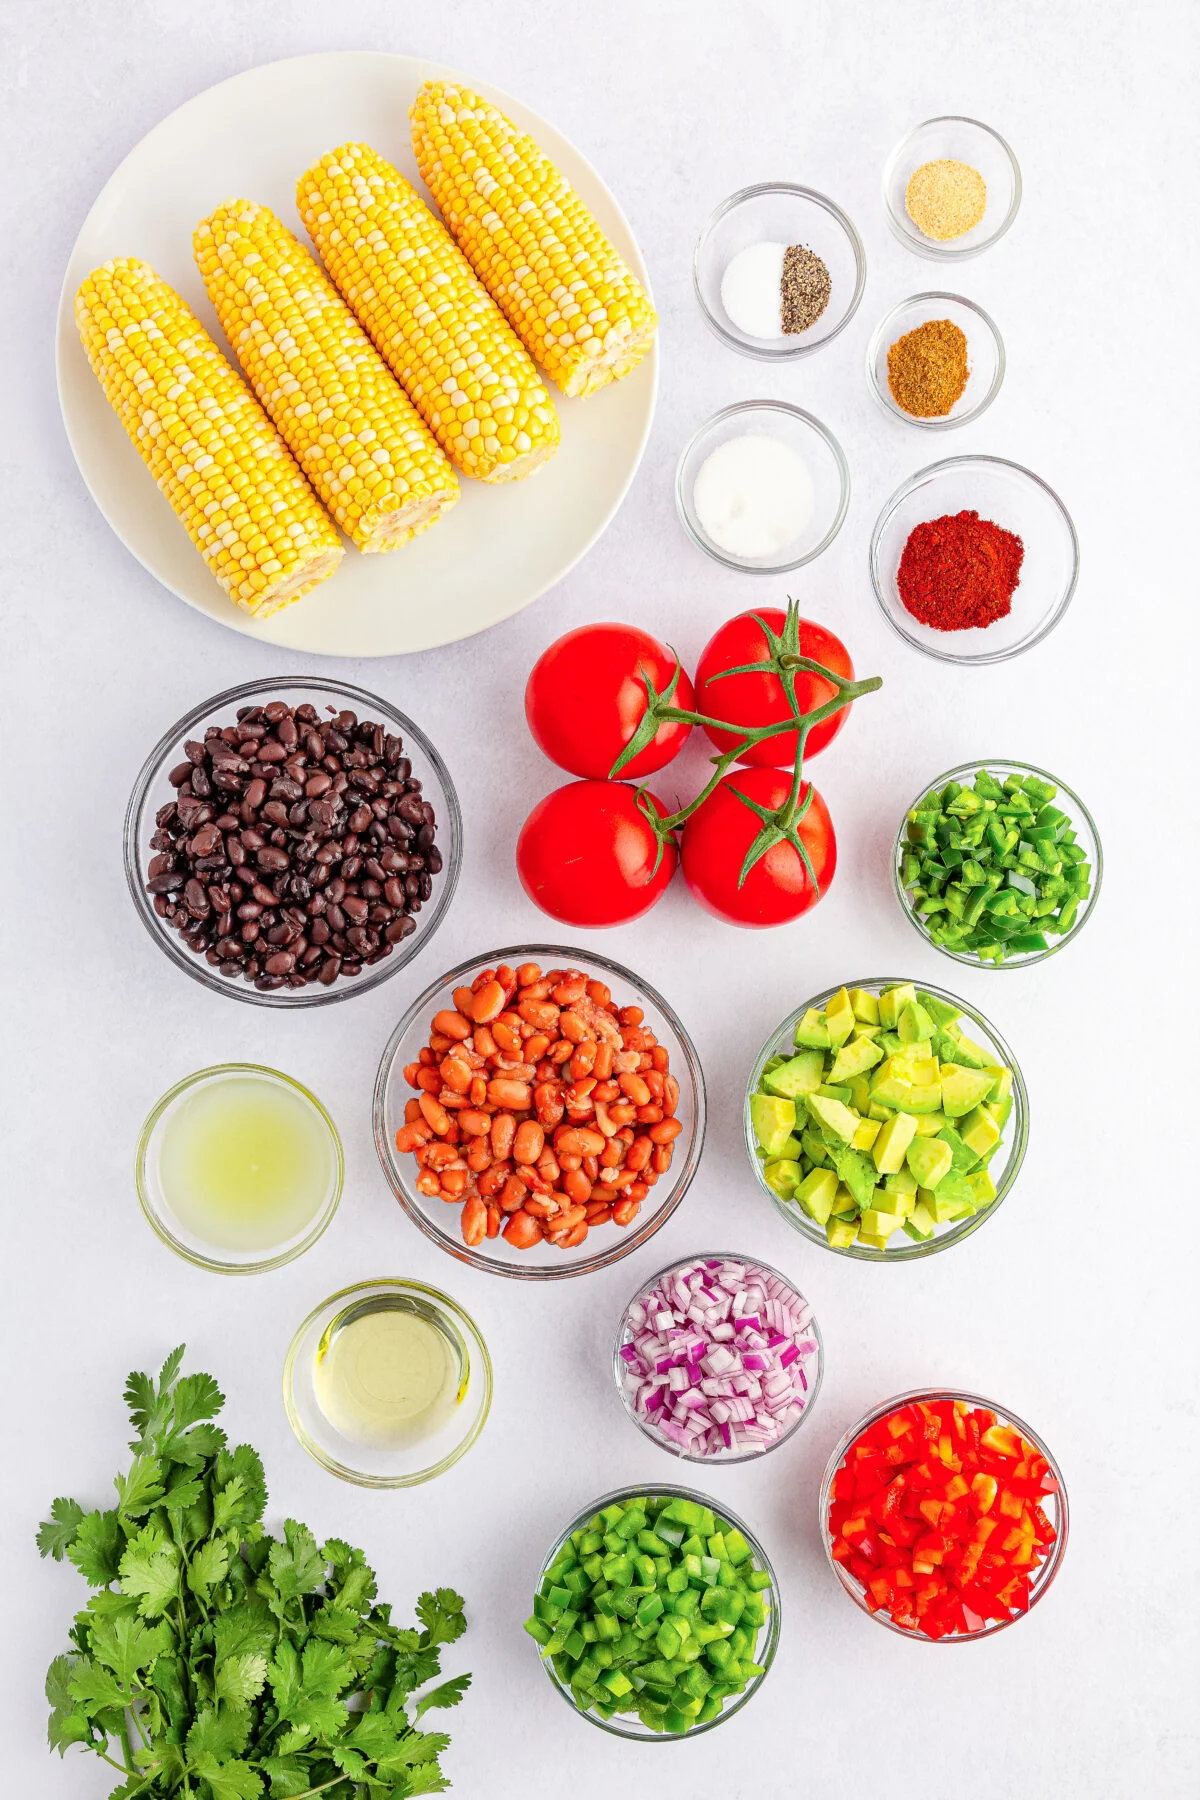 Ingredients for cowboy caviar.